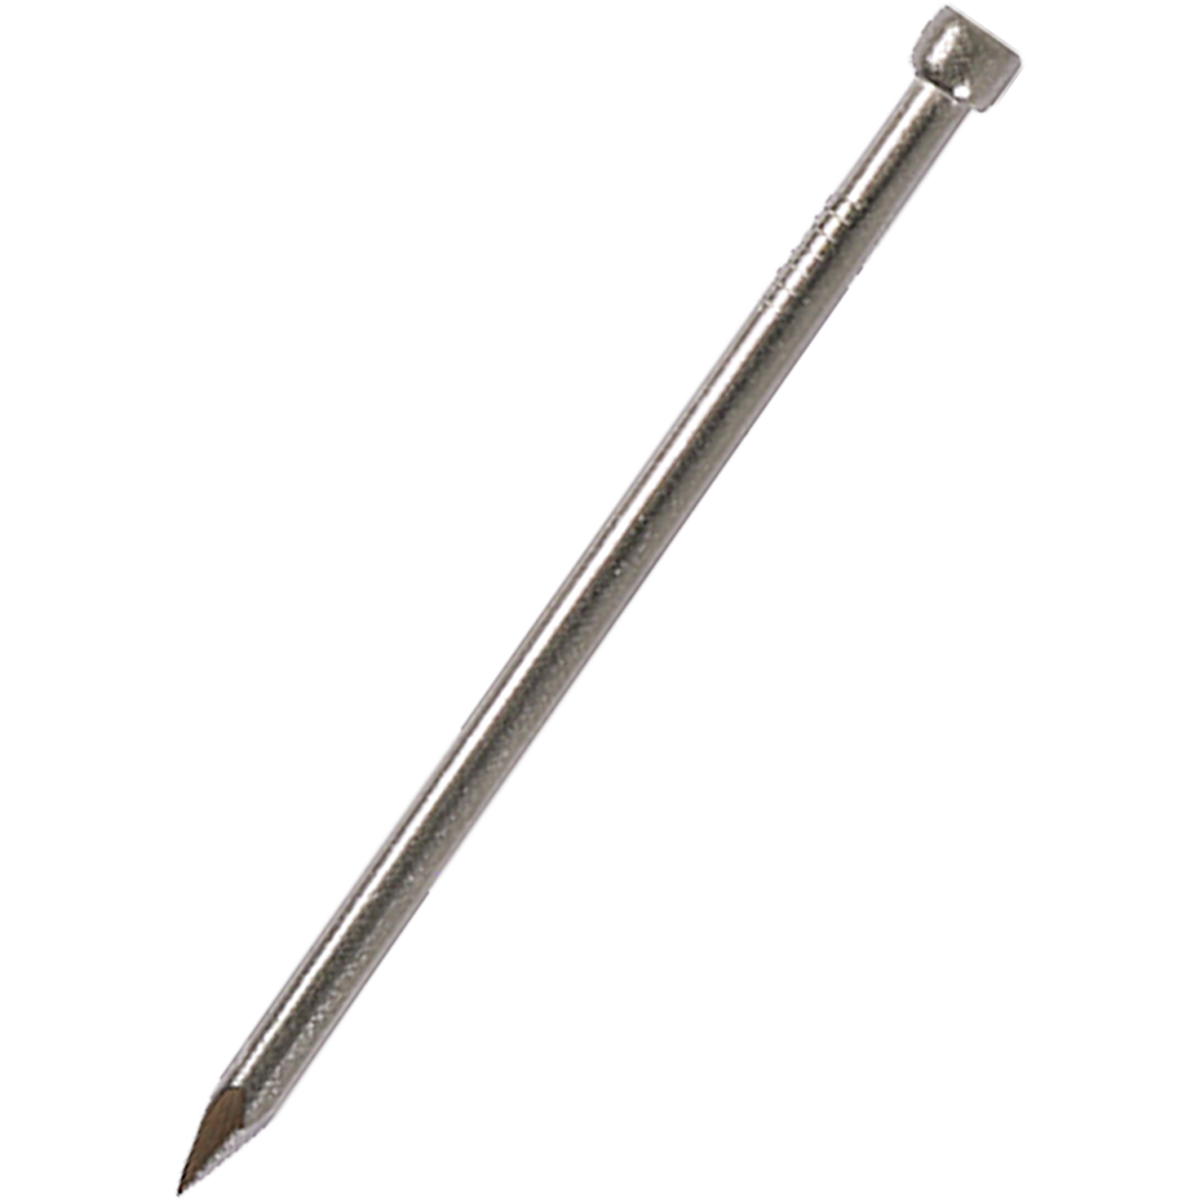 A2 stainless steel, corrosion-resistant lost head nails